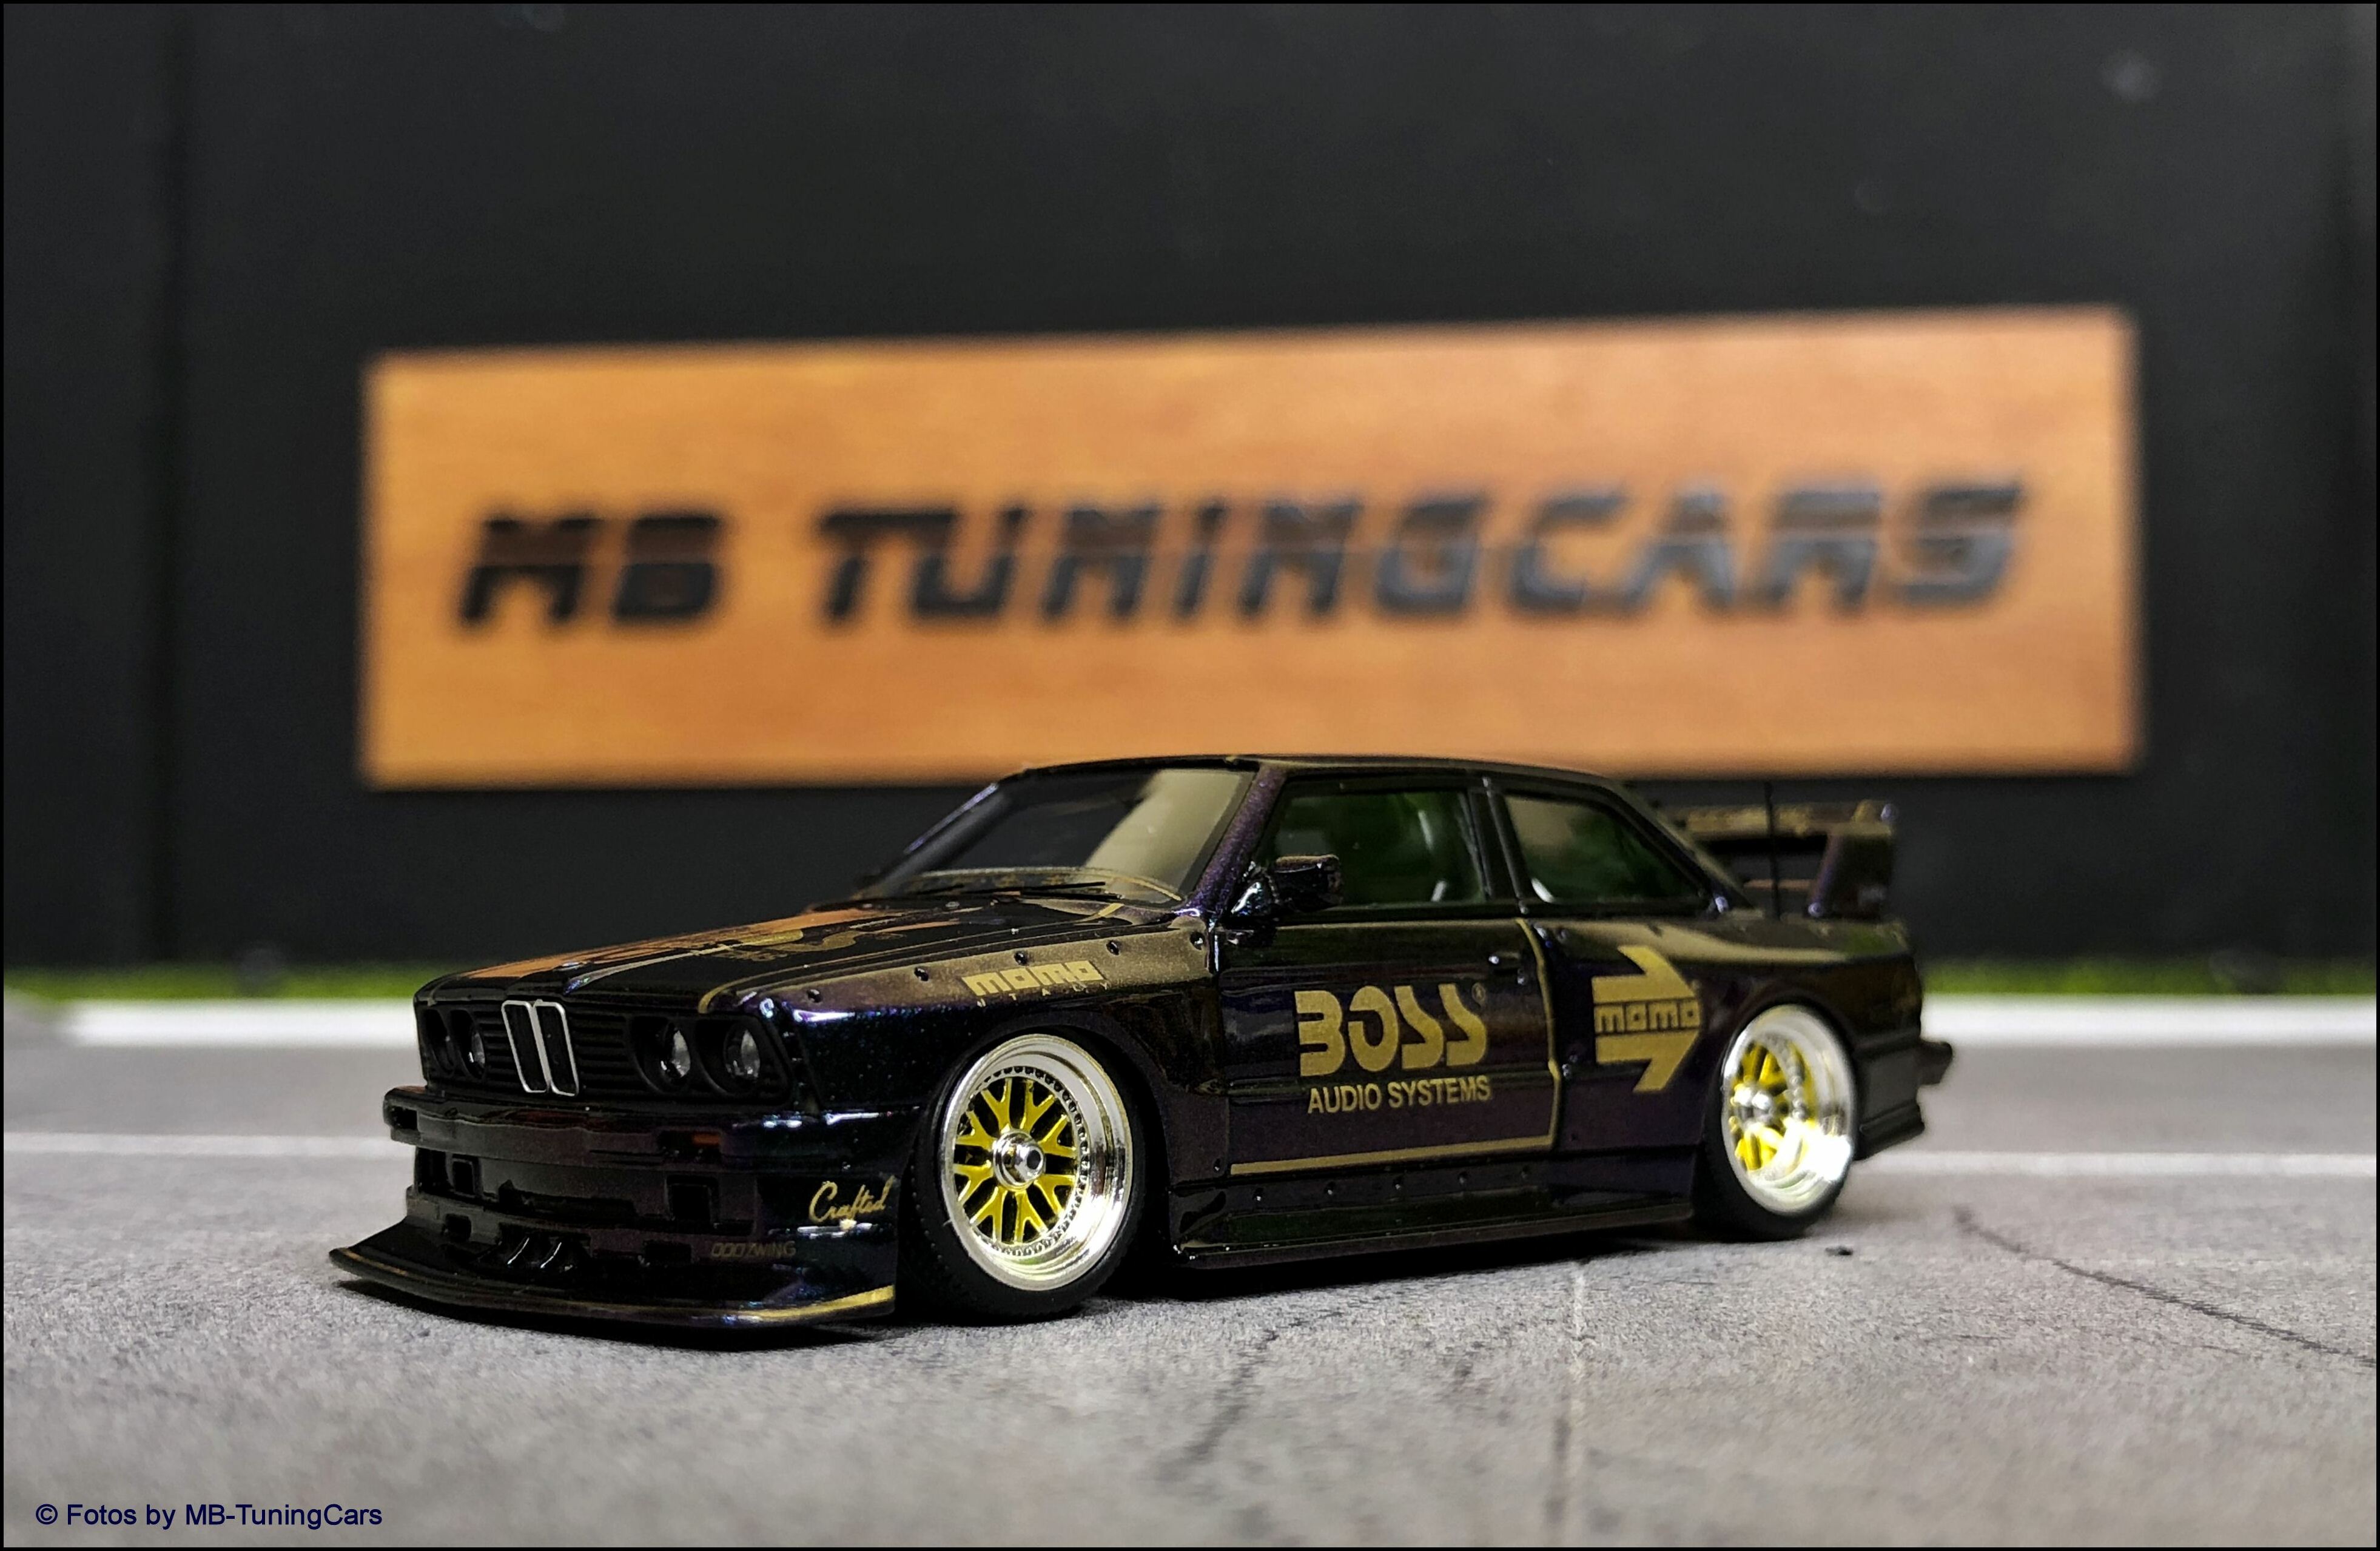 Mb-Tuningcars - 1:64 Bmw E30 Widebody Chameleon Limited Edition